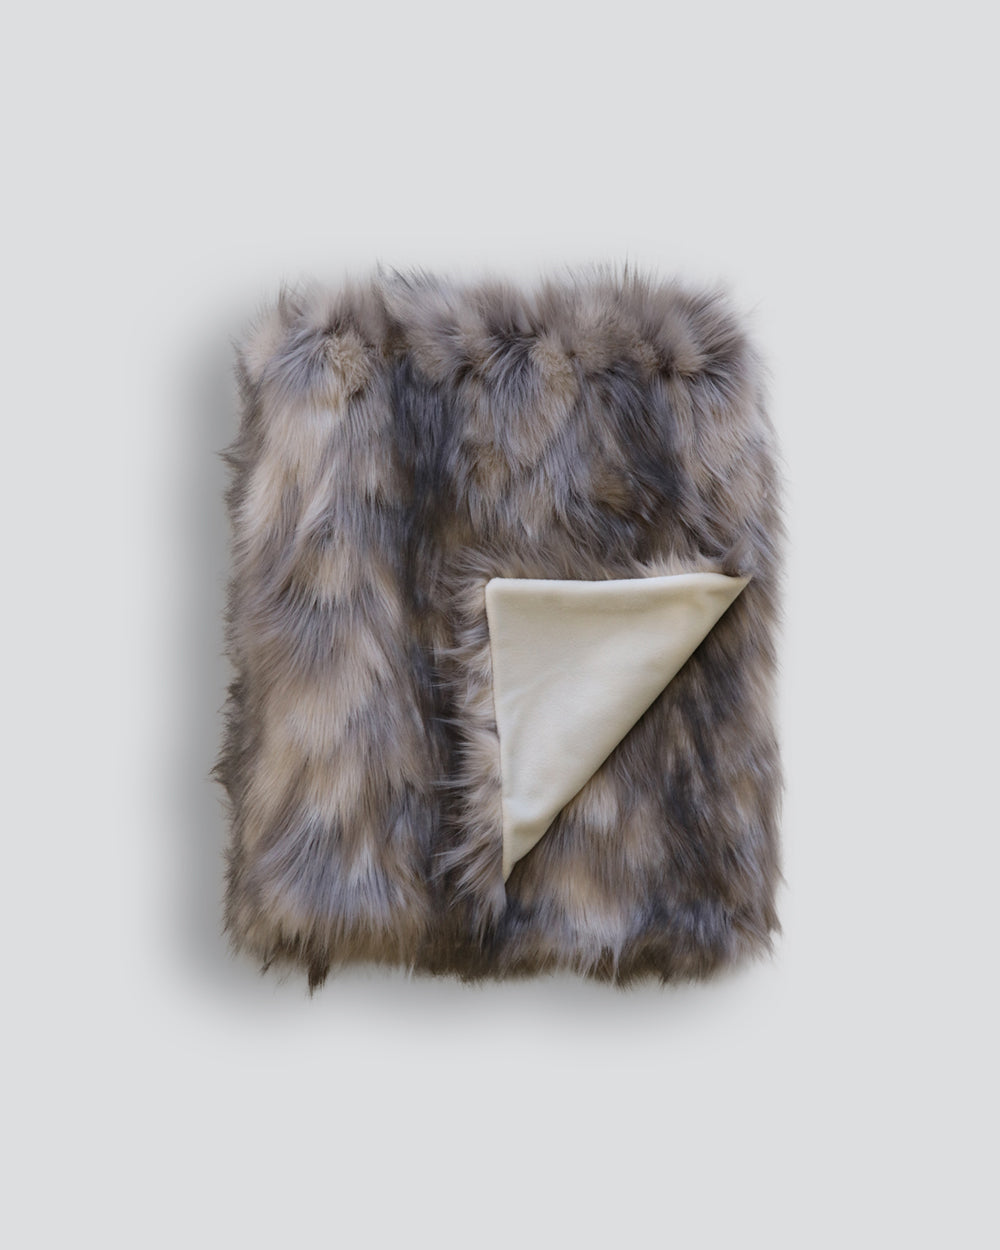 Heirloom Mountain Hare Throw Rug Blanket in Faux Fur is available from Make Your House A Home Premium Stockist. Furniture Store Bendigo, Victoria. Australia Wide Delivery.